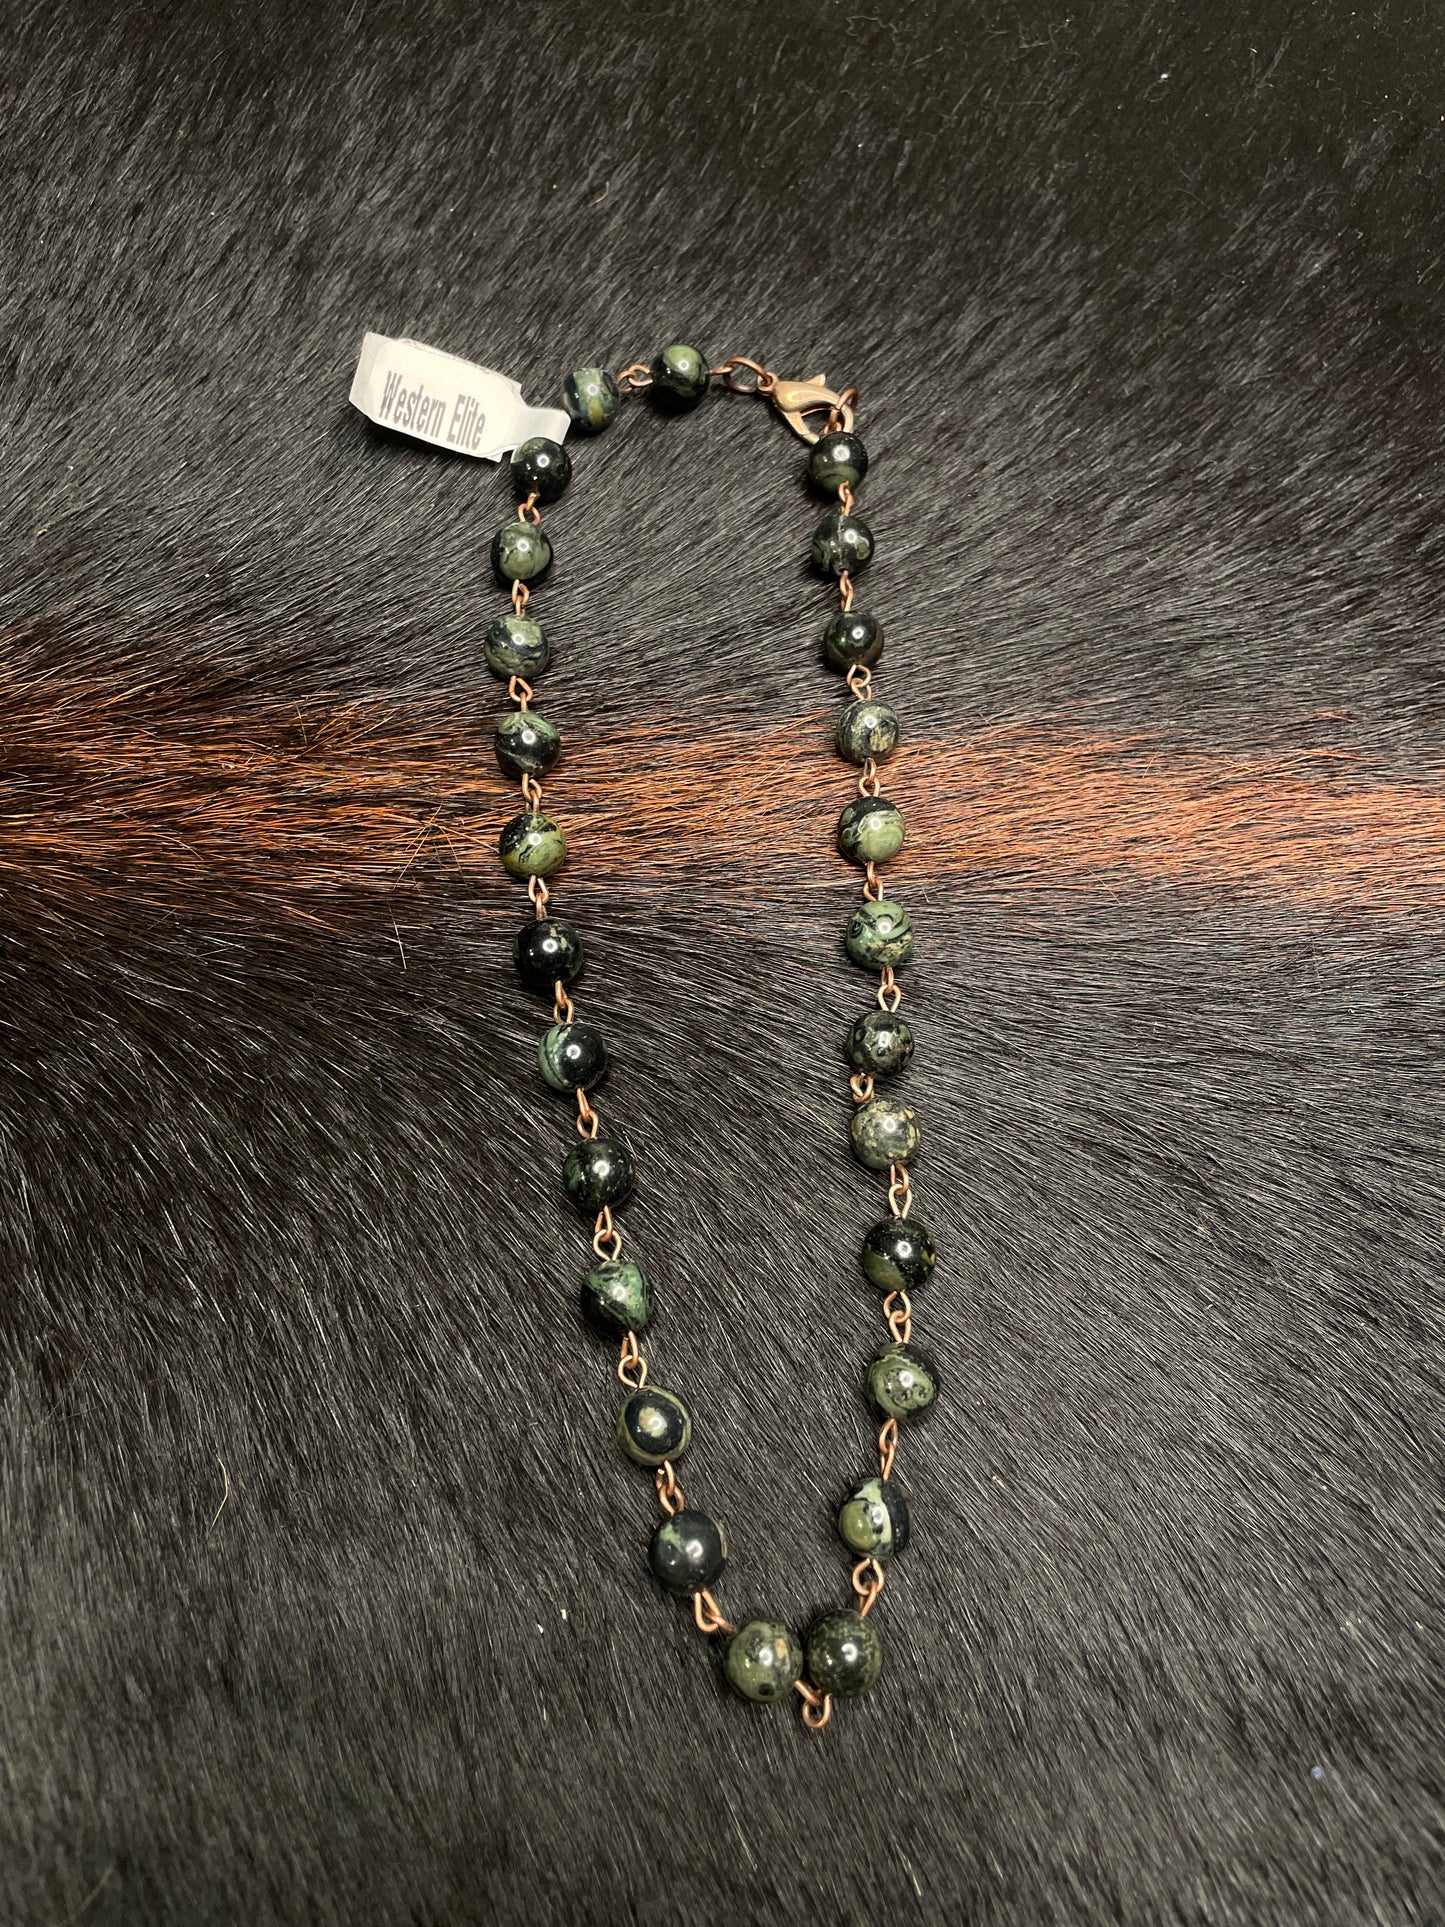 DARK GREEN MARBLED GLASS BEAD NECKLACE